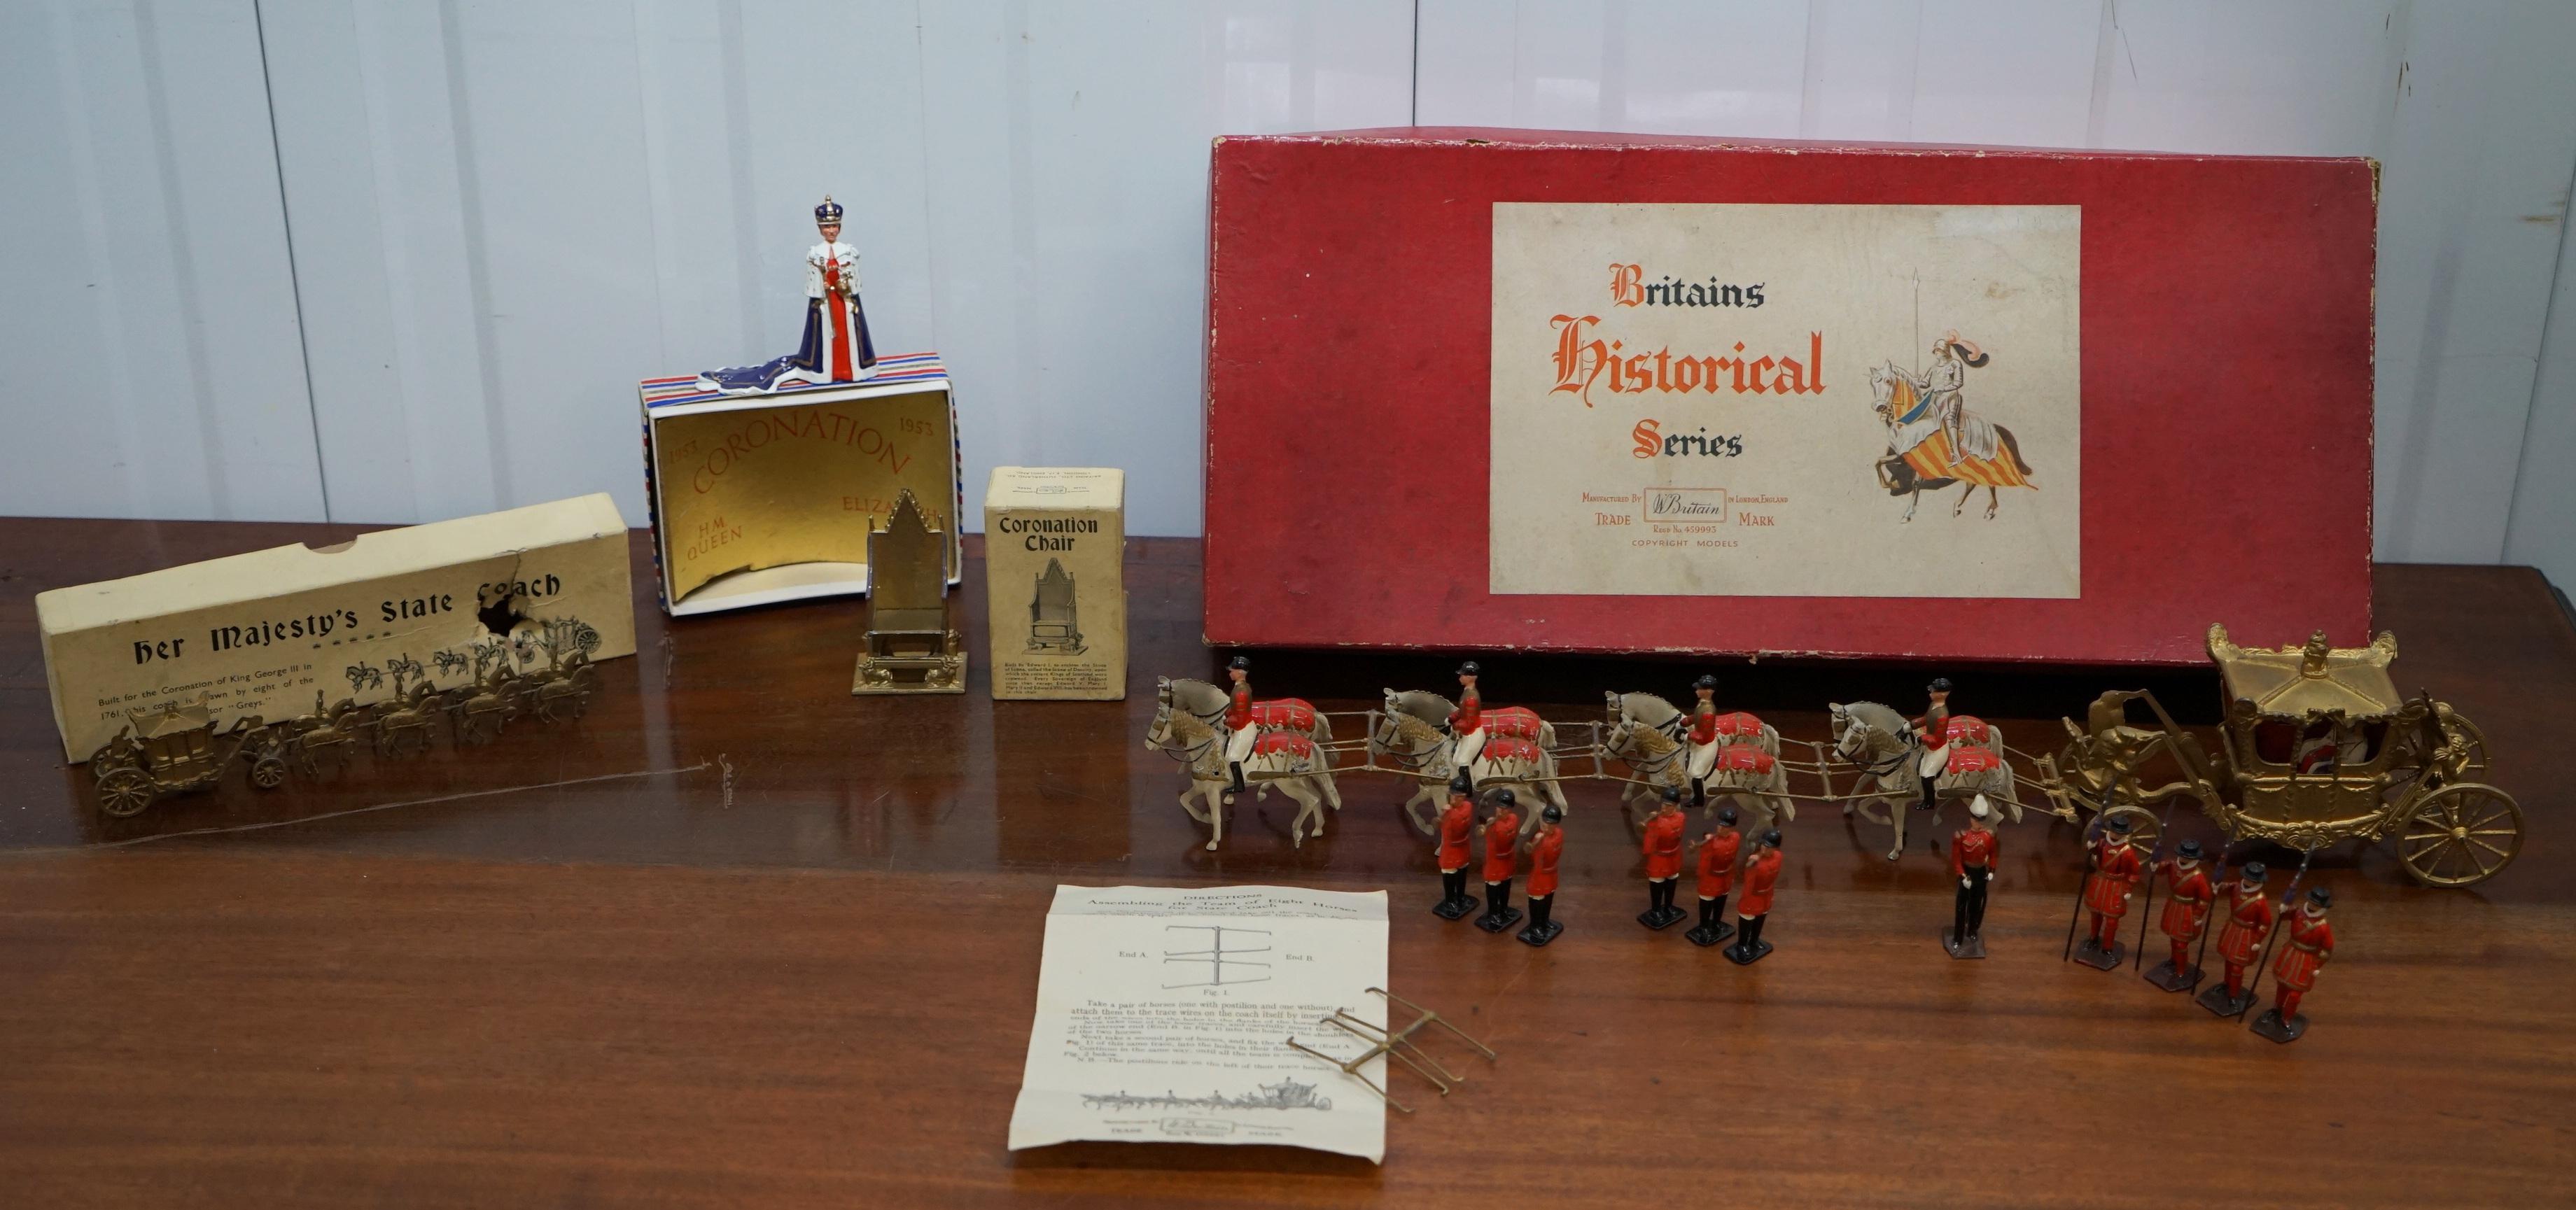 We are delighted to offer for sale this lovely rare boxed original souvenir from the 1950s of the Royal stagecoach and Queen Elizebeth with the Duke being pull by 8 dapple greys

This is part of a larger set of vintage royal exhibition toys that I